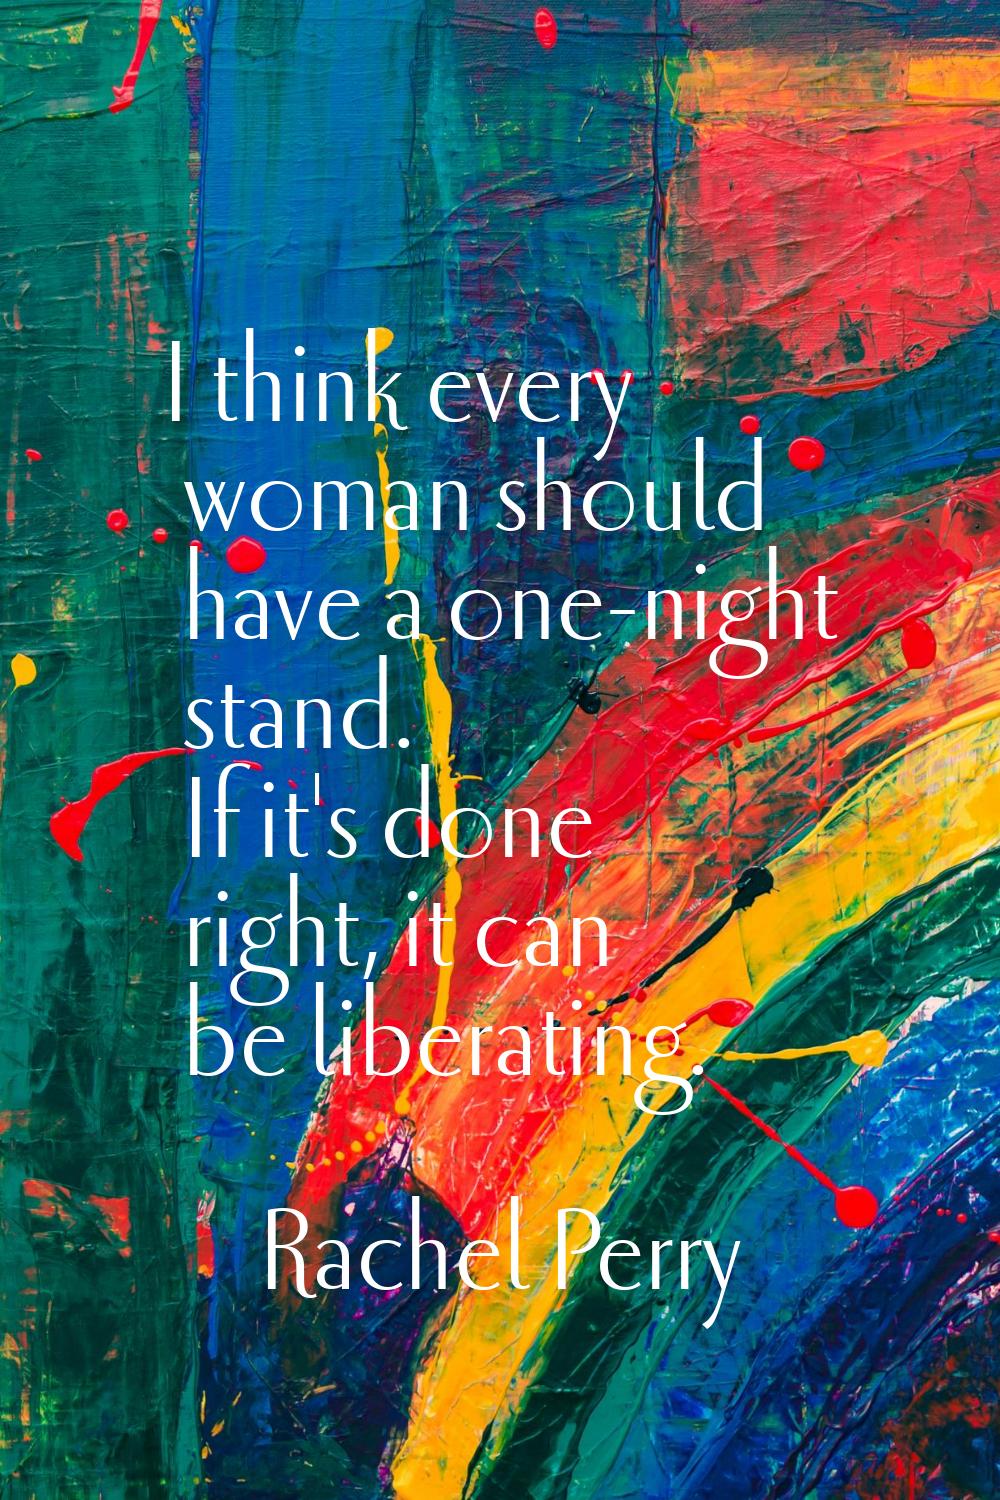 I think every woman should have a one-night stand. If it's done right, it can be liberating.